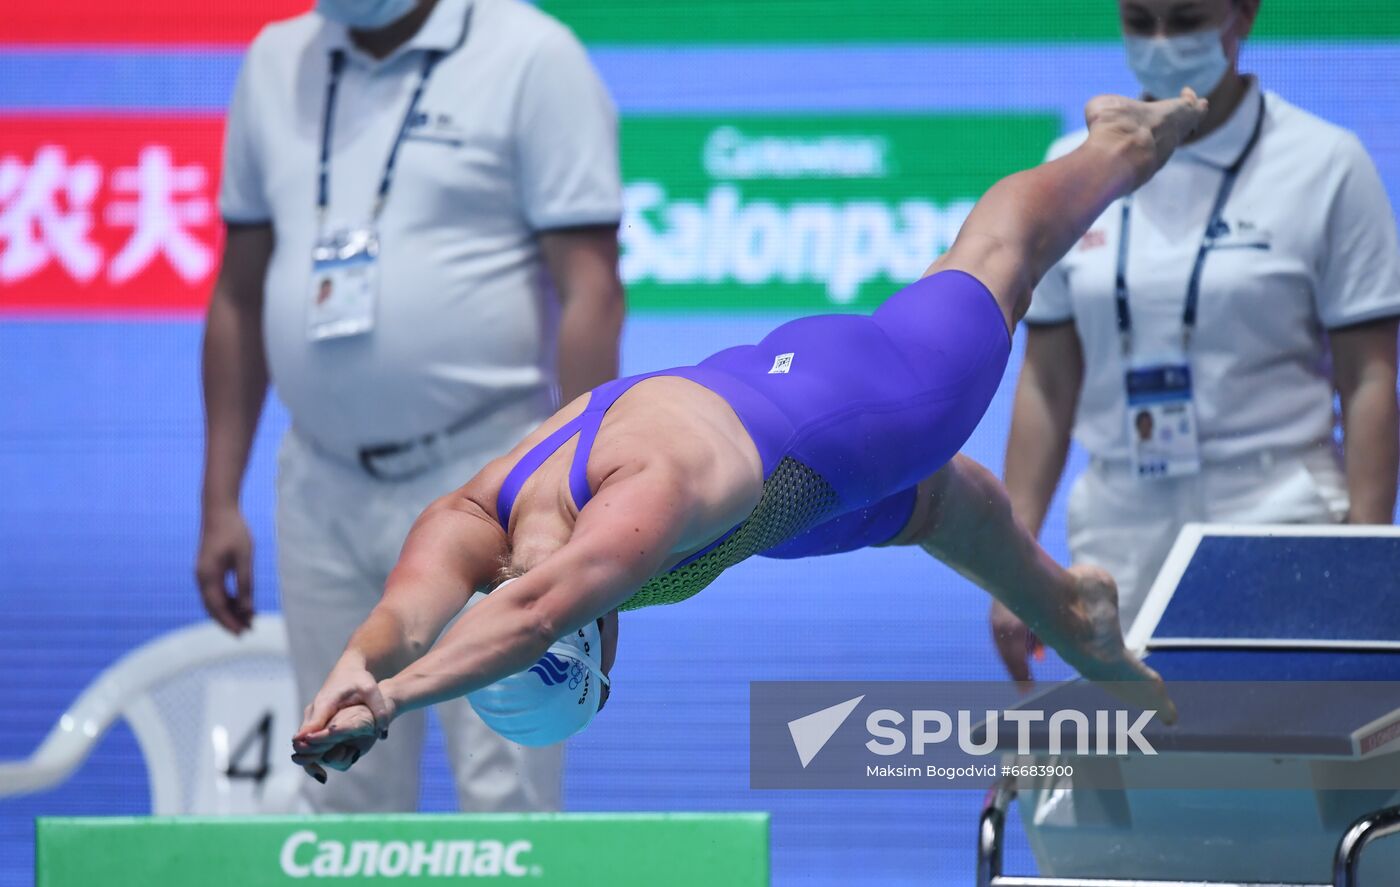 Russia Swimming World Cup